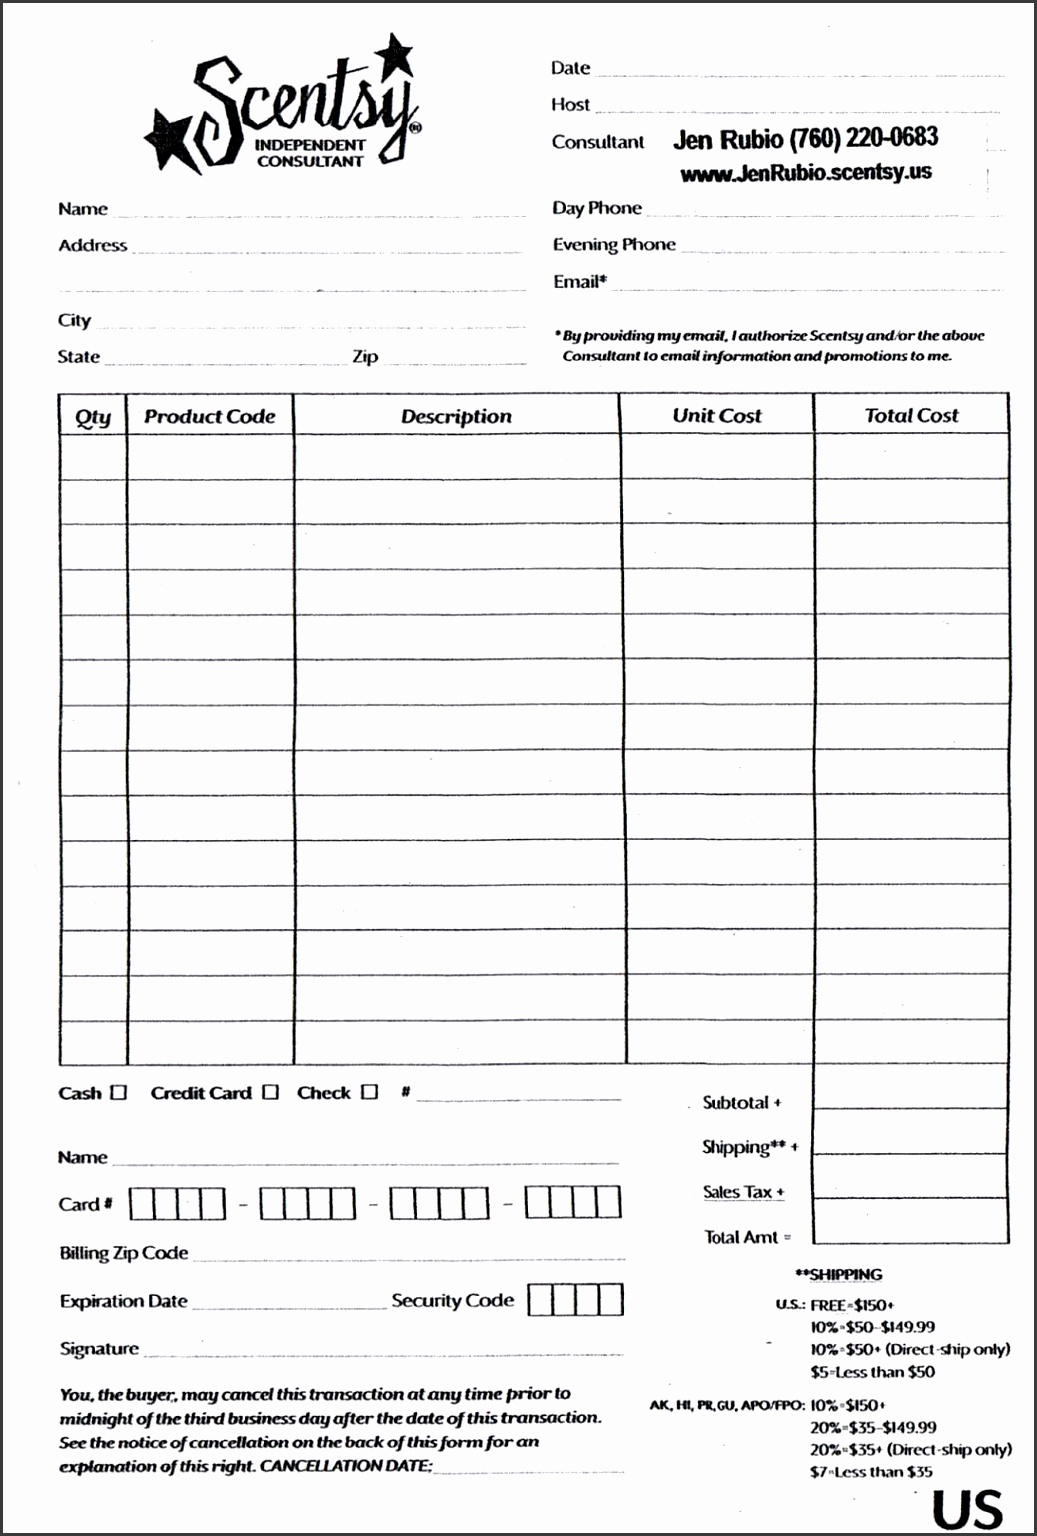 Scentsy Order Form Pdf | Www.topsimages - Free Printable Scentsy Order Forms